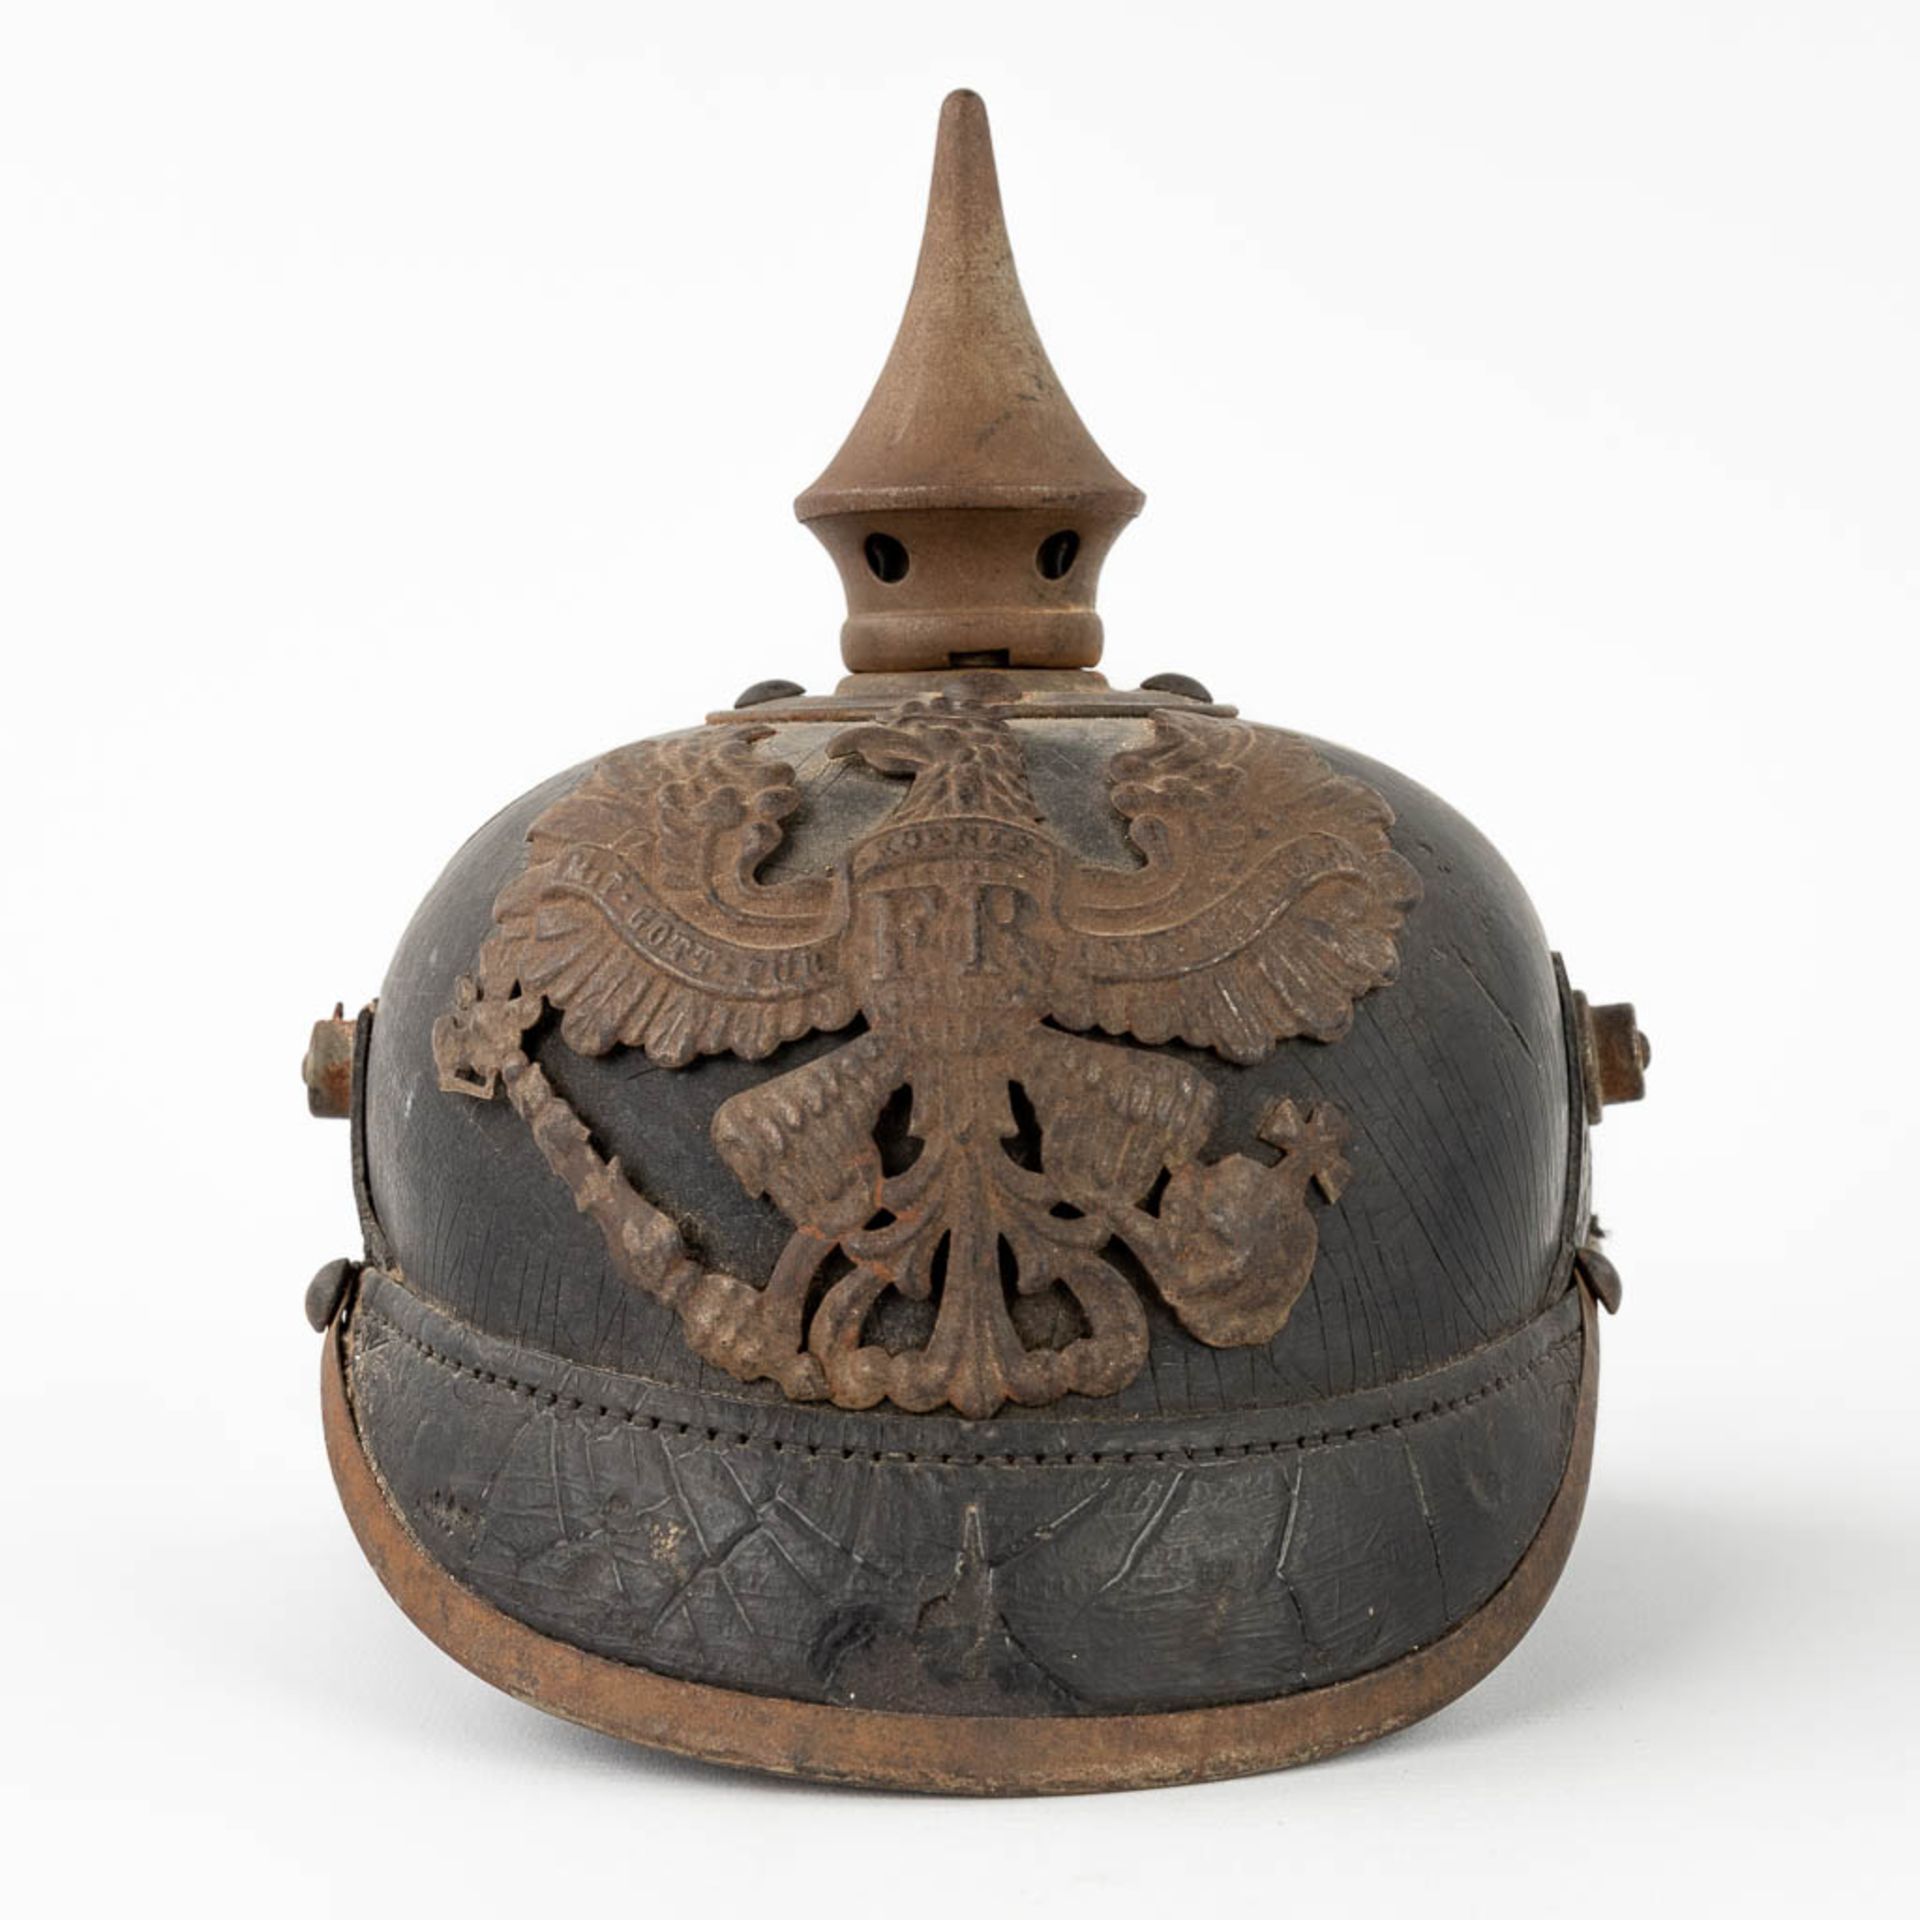 An antique German Pickelhaube. Leather and copper. (L: 18 x W: 23 x H: 20 cm)